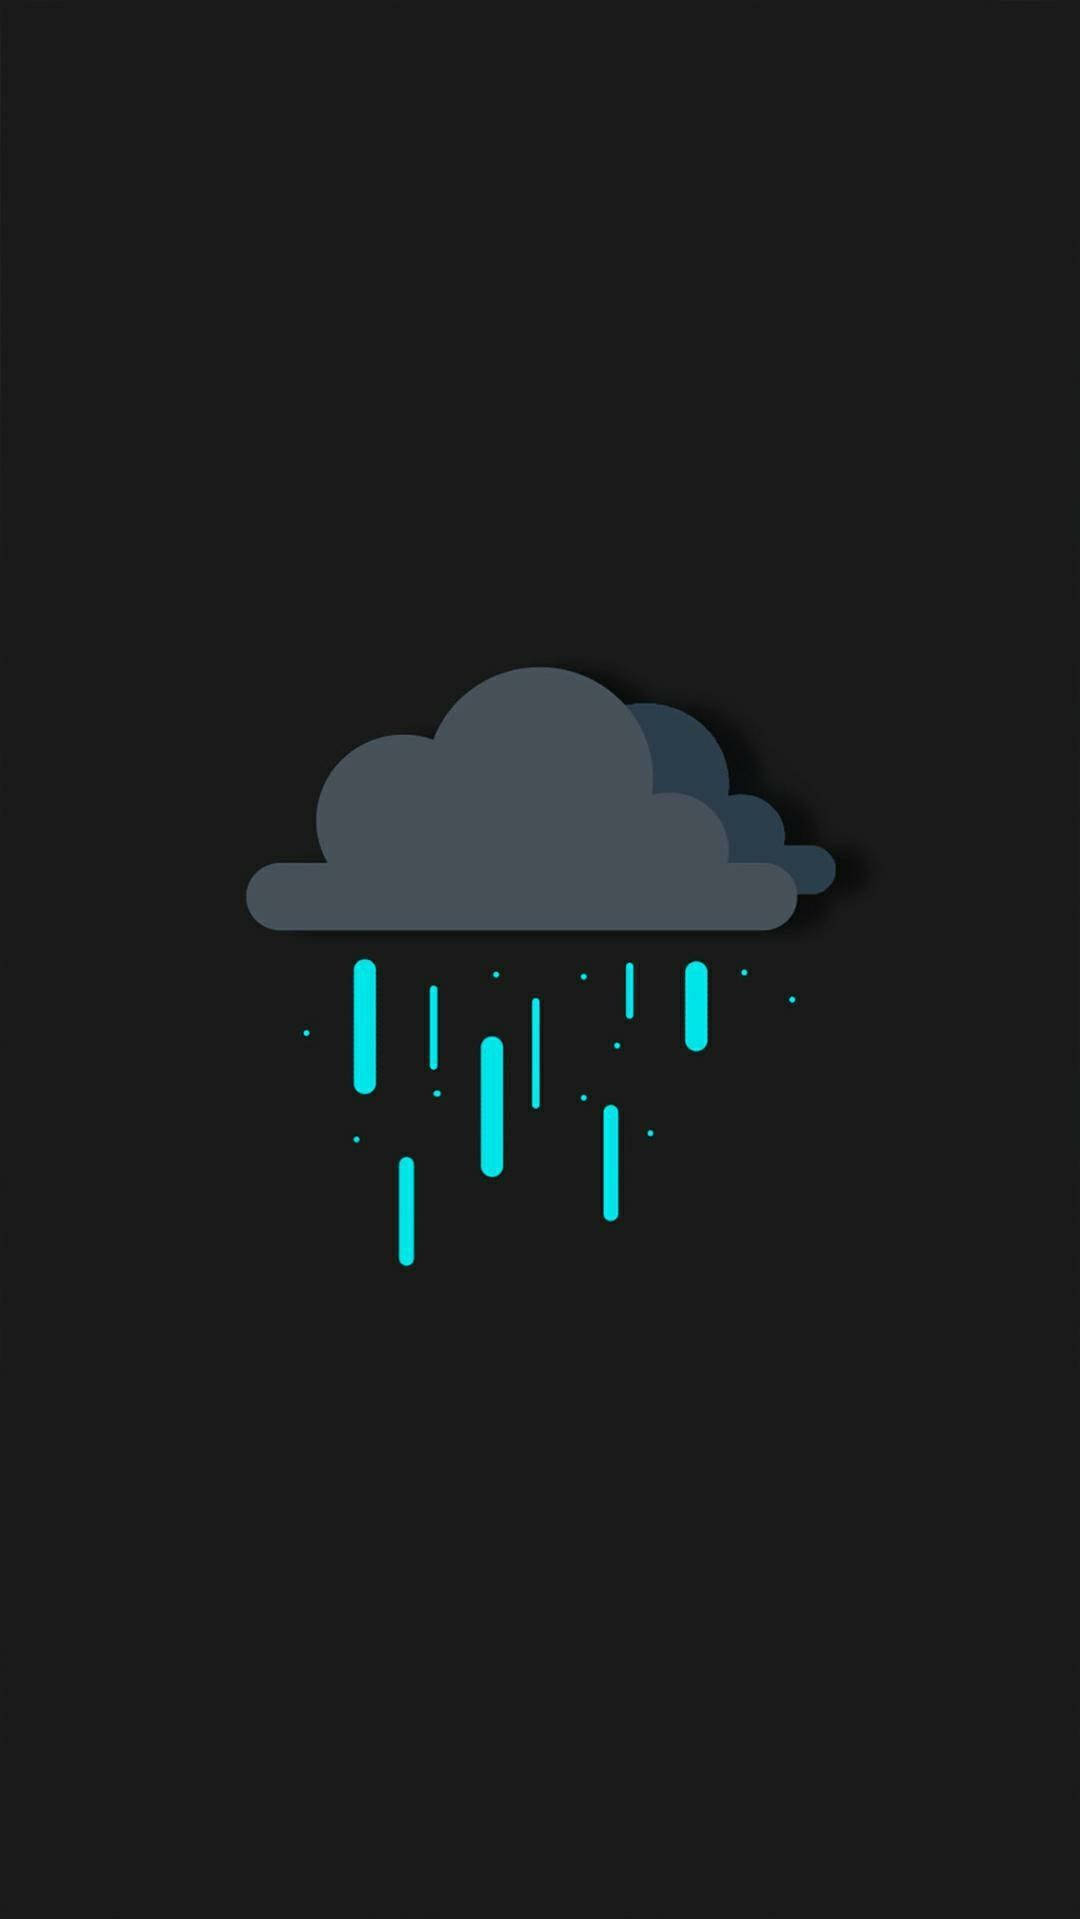 Rain Cloud For Cool Simple Background